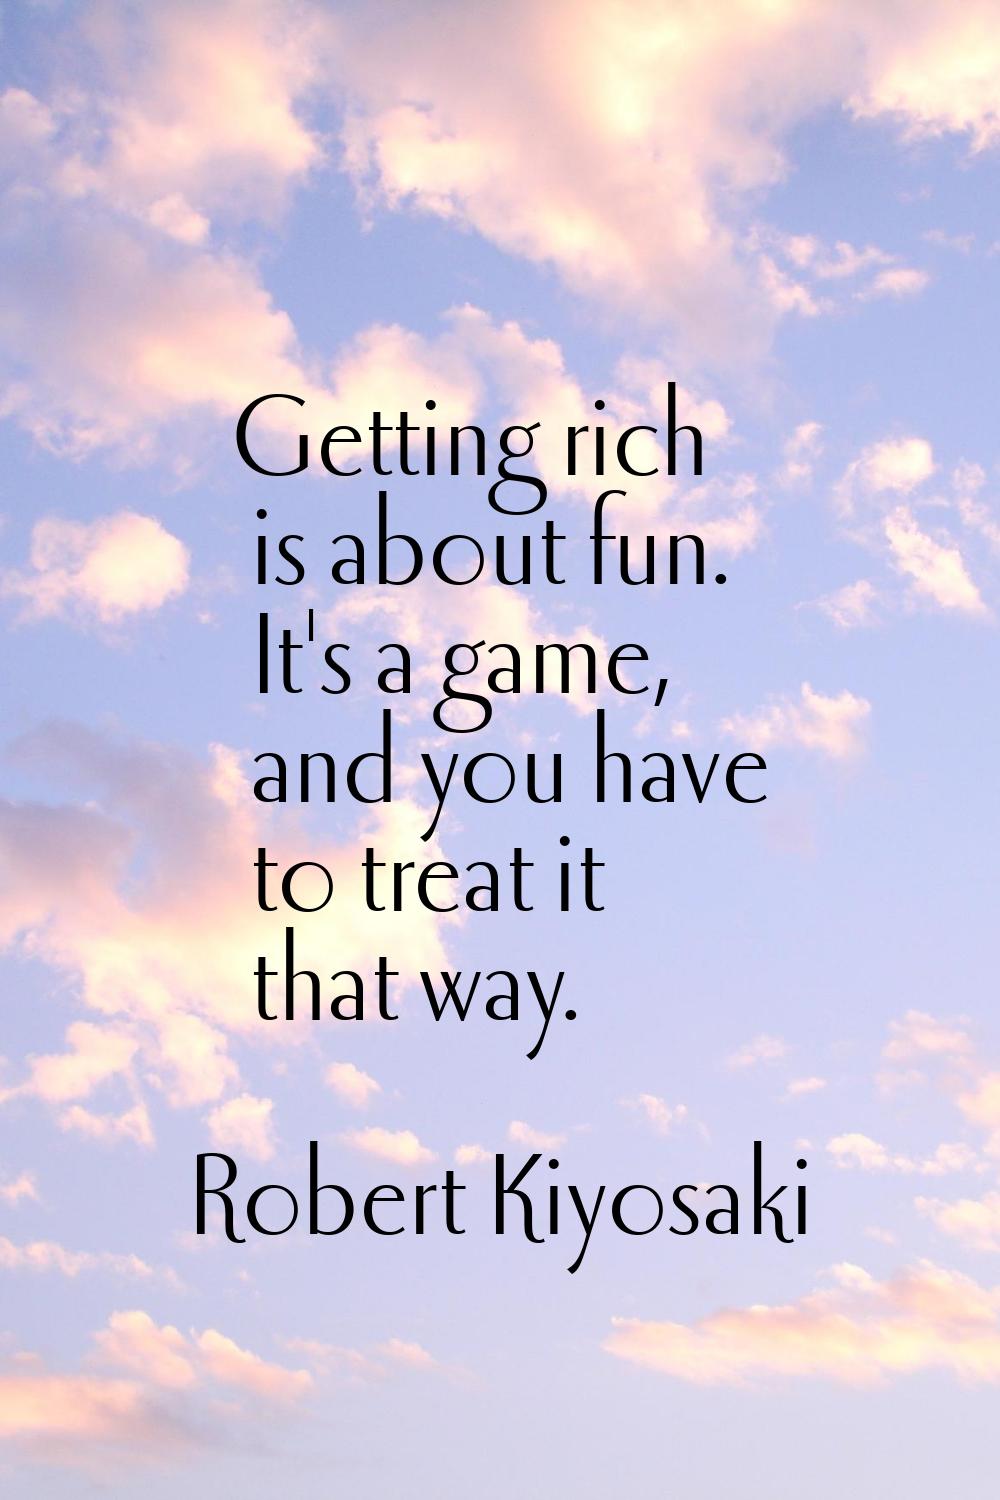 Getting rich is about fun. It's a game, and you have to treat it that way.